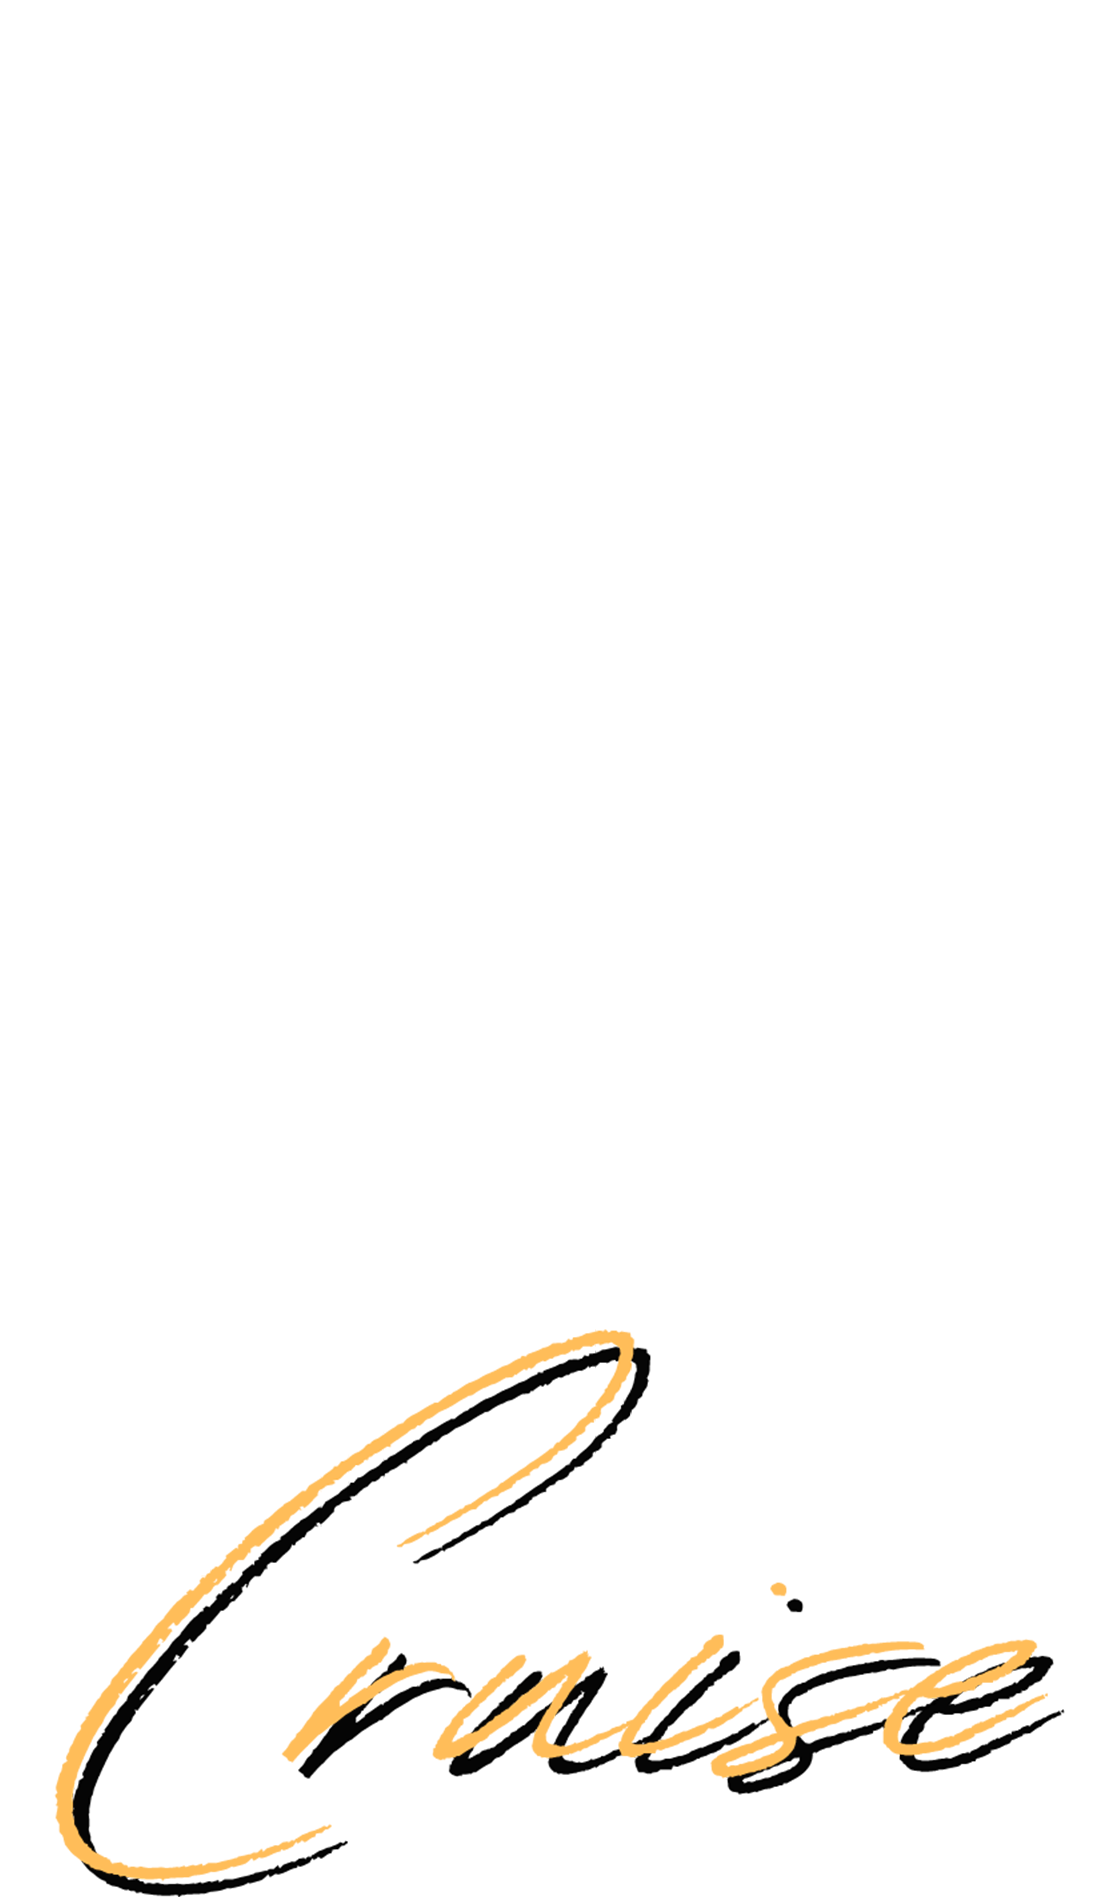 AFROCRUISE.EU - YOUR PERFECT STARTER TO YOUR FESTIVAL ADVENTURE!